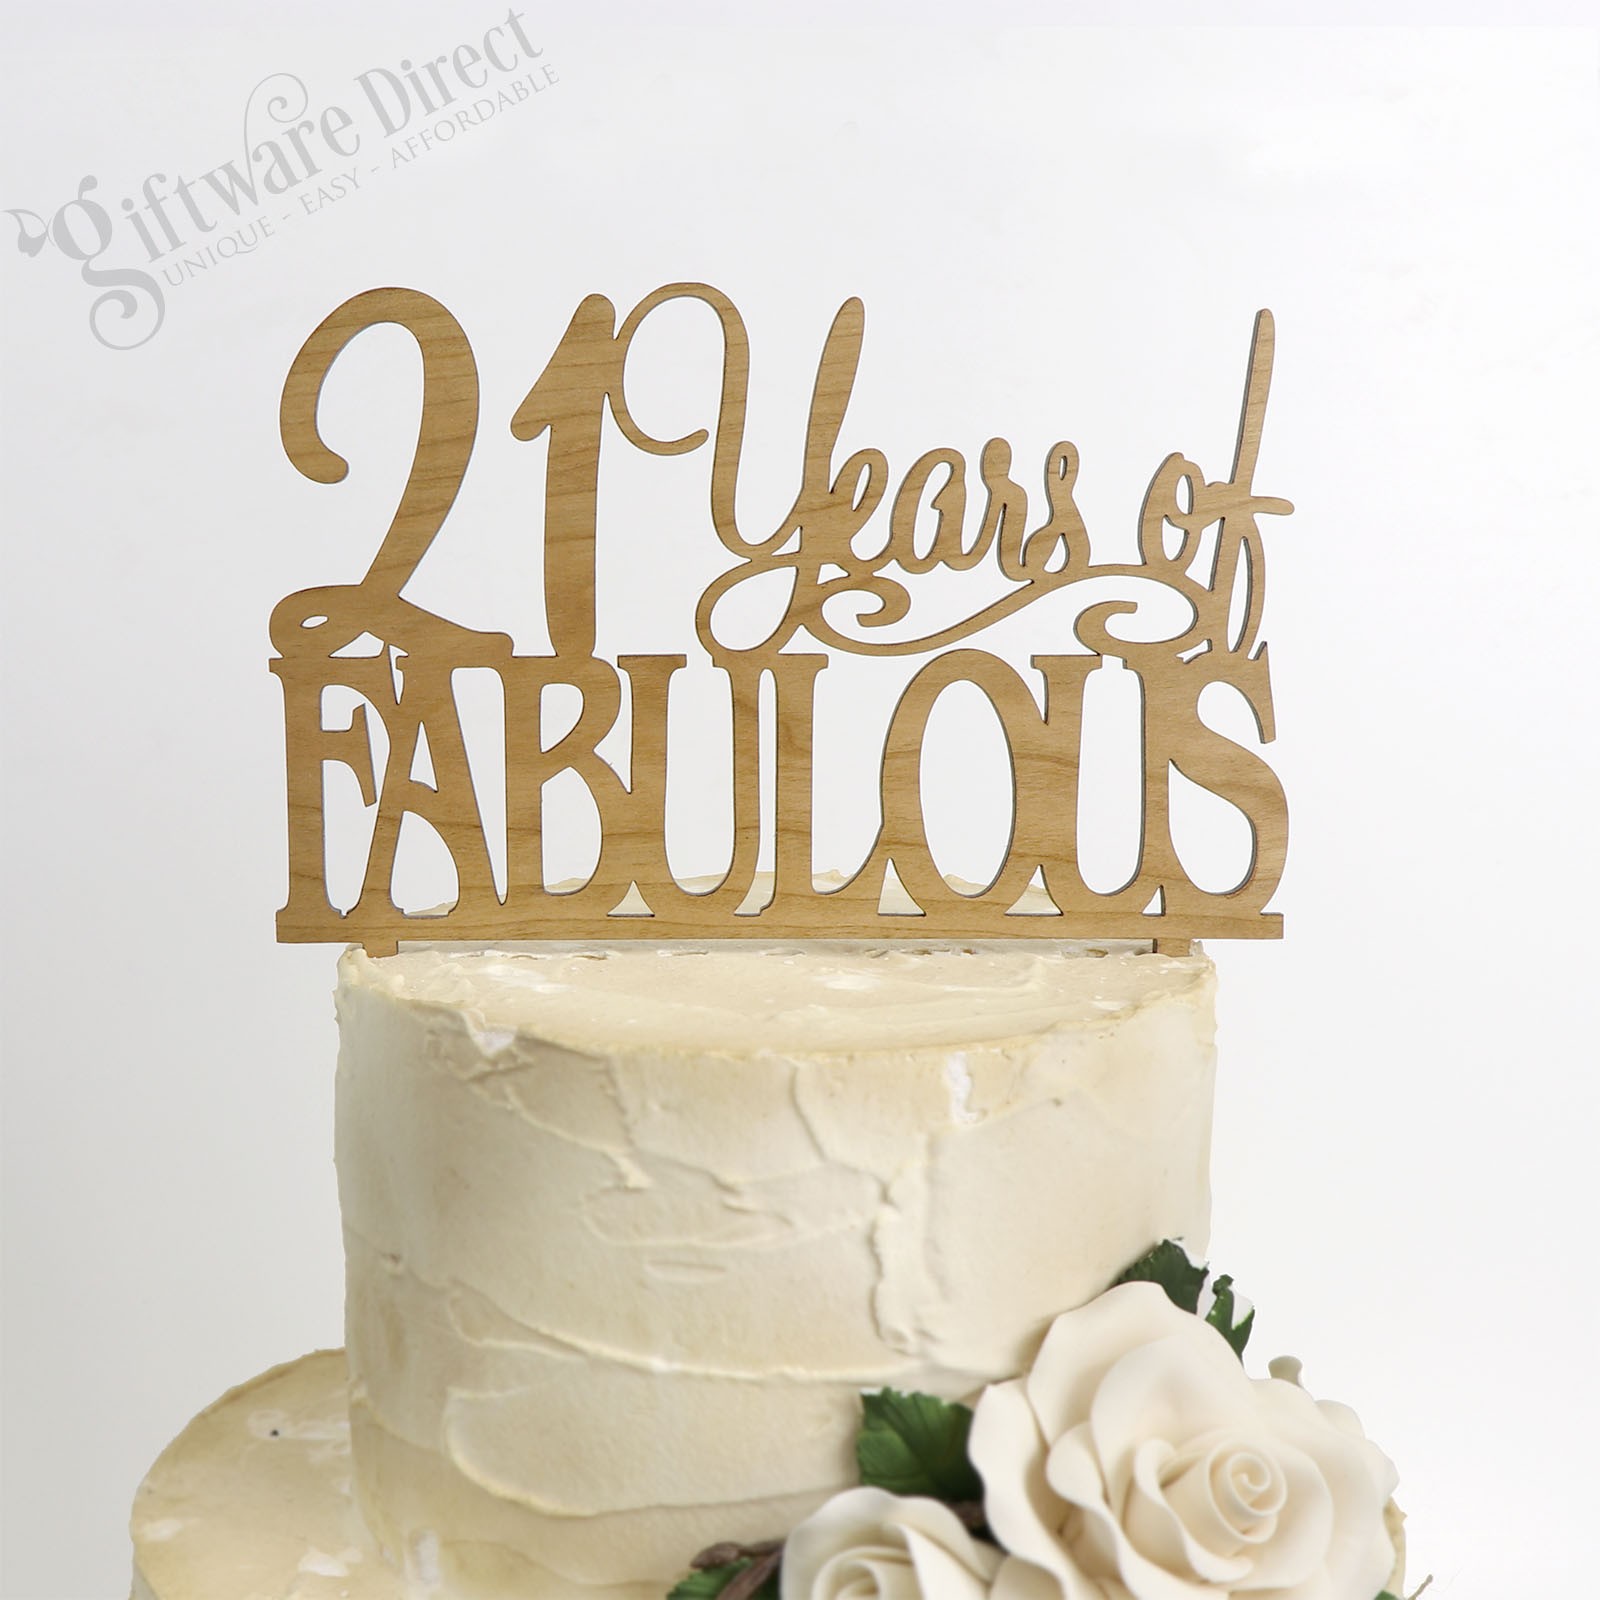 21st Birthday Present Ideas 21 Years of Fabulous Birthday Bamboo Cake Topper Any Age topper